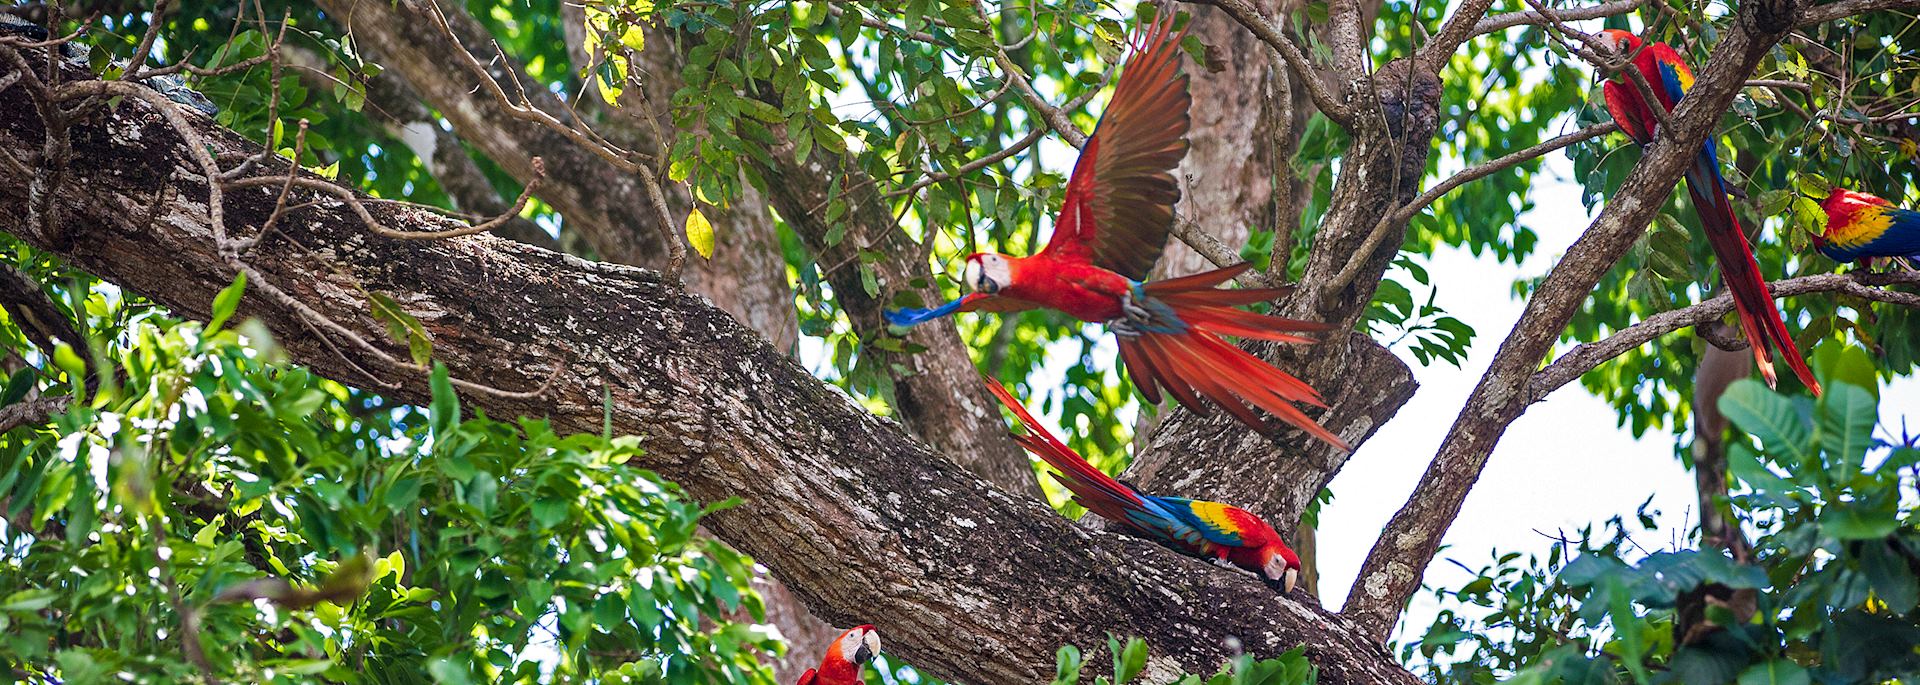 Scarlet macaws in Costa Rica